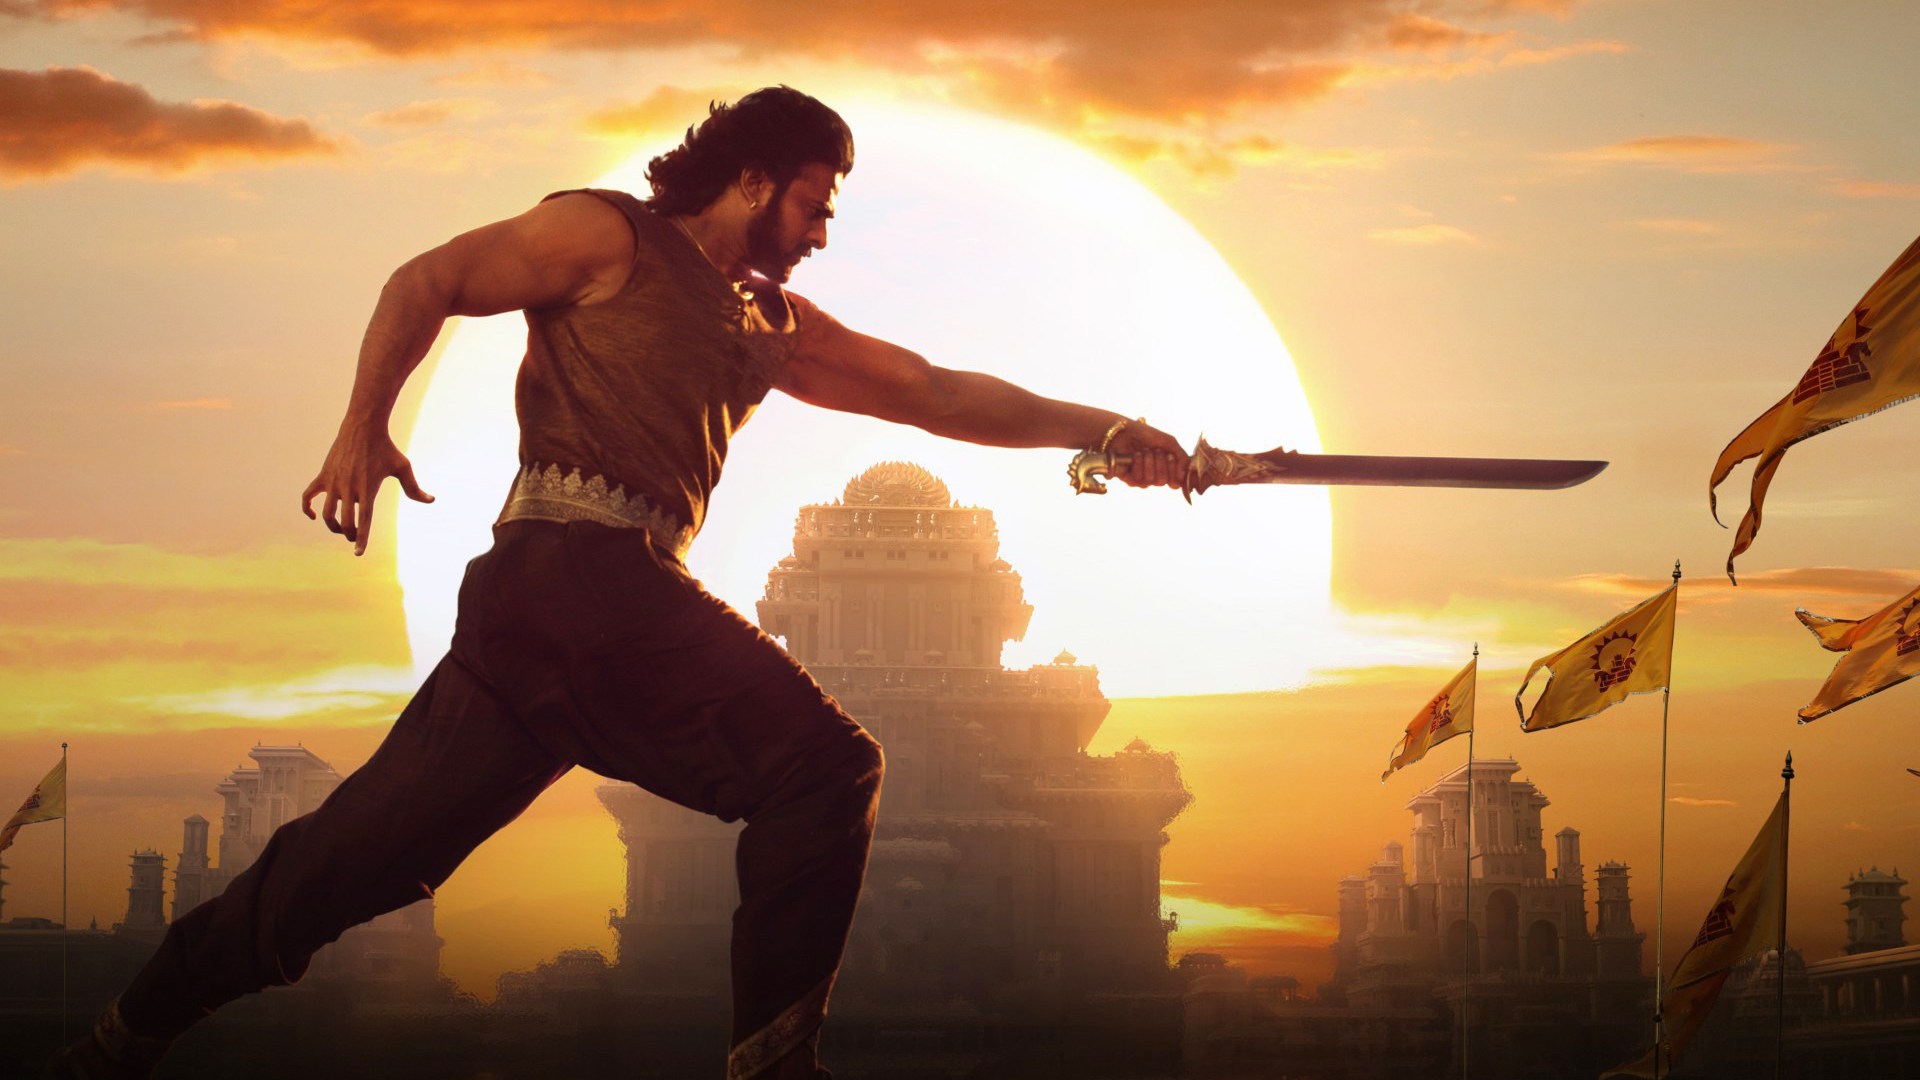 baahubali 2: the conclusion, movie lock screen backgrounds